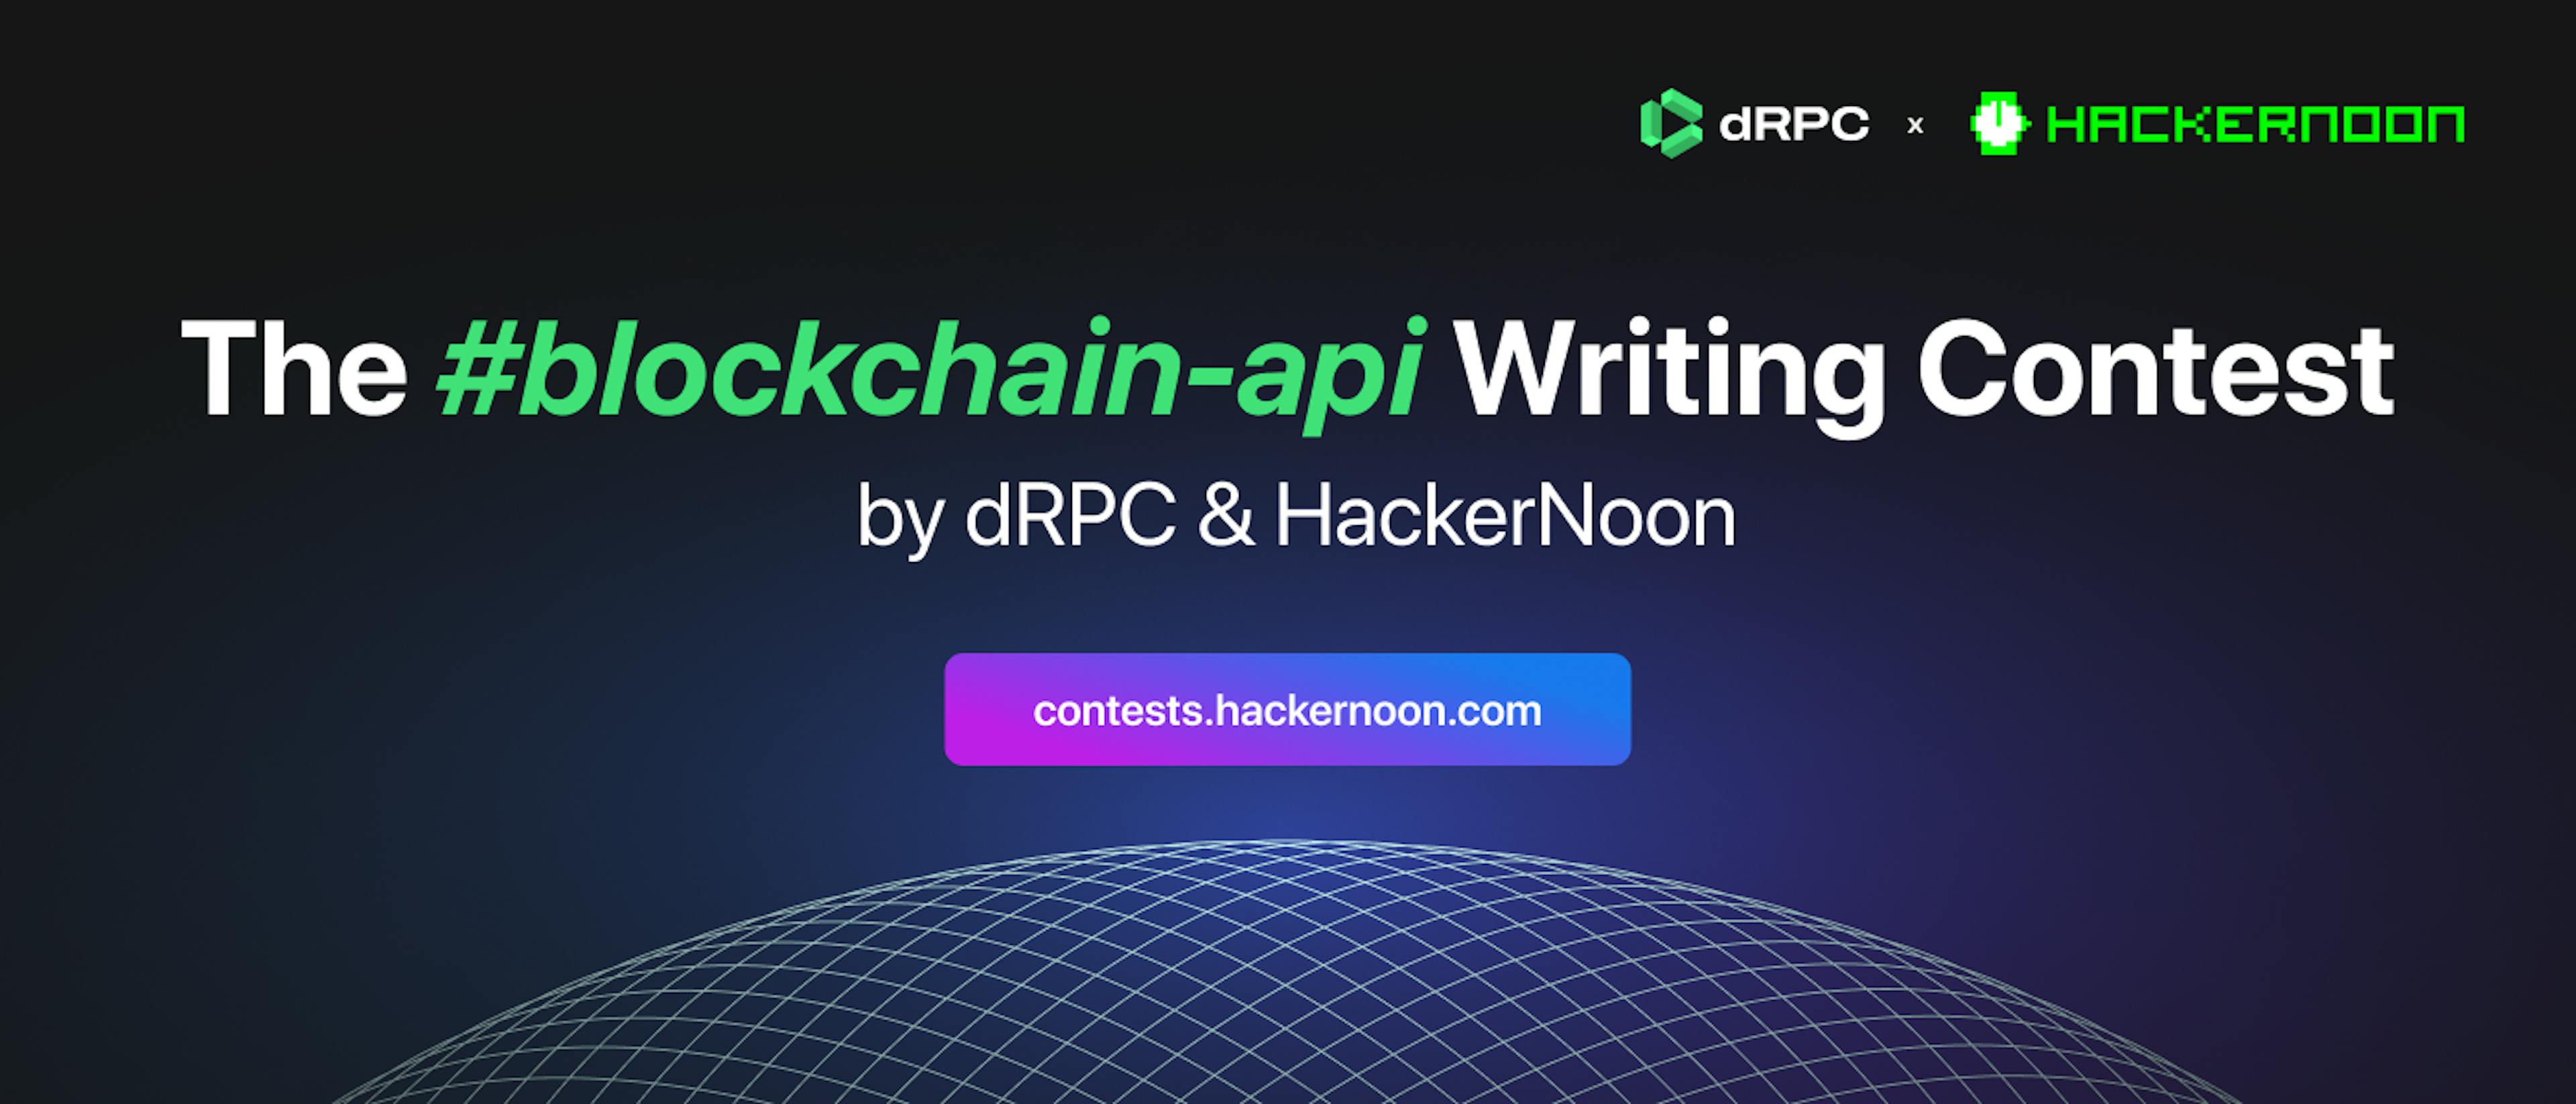 featured image - Introducing the #blockchain-api Writing Contest by dRPC and HackerNoon